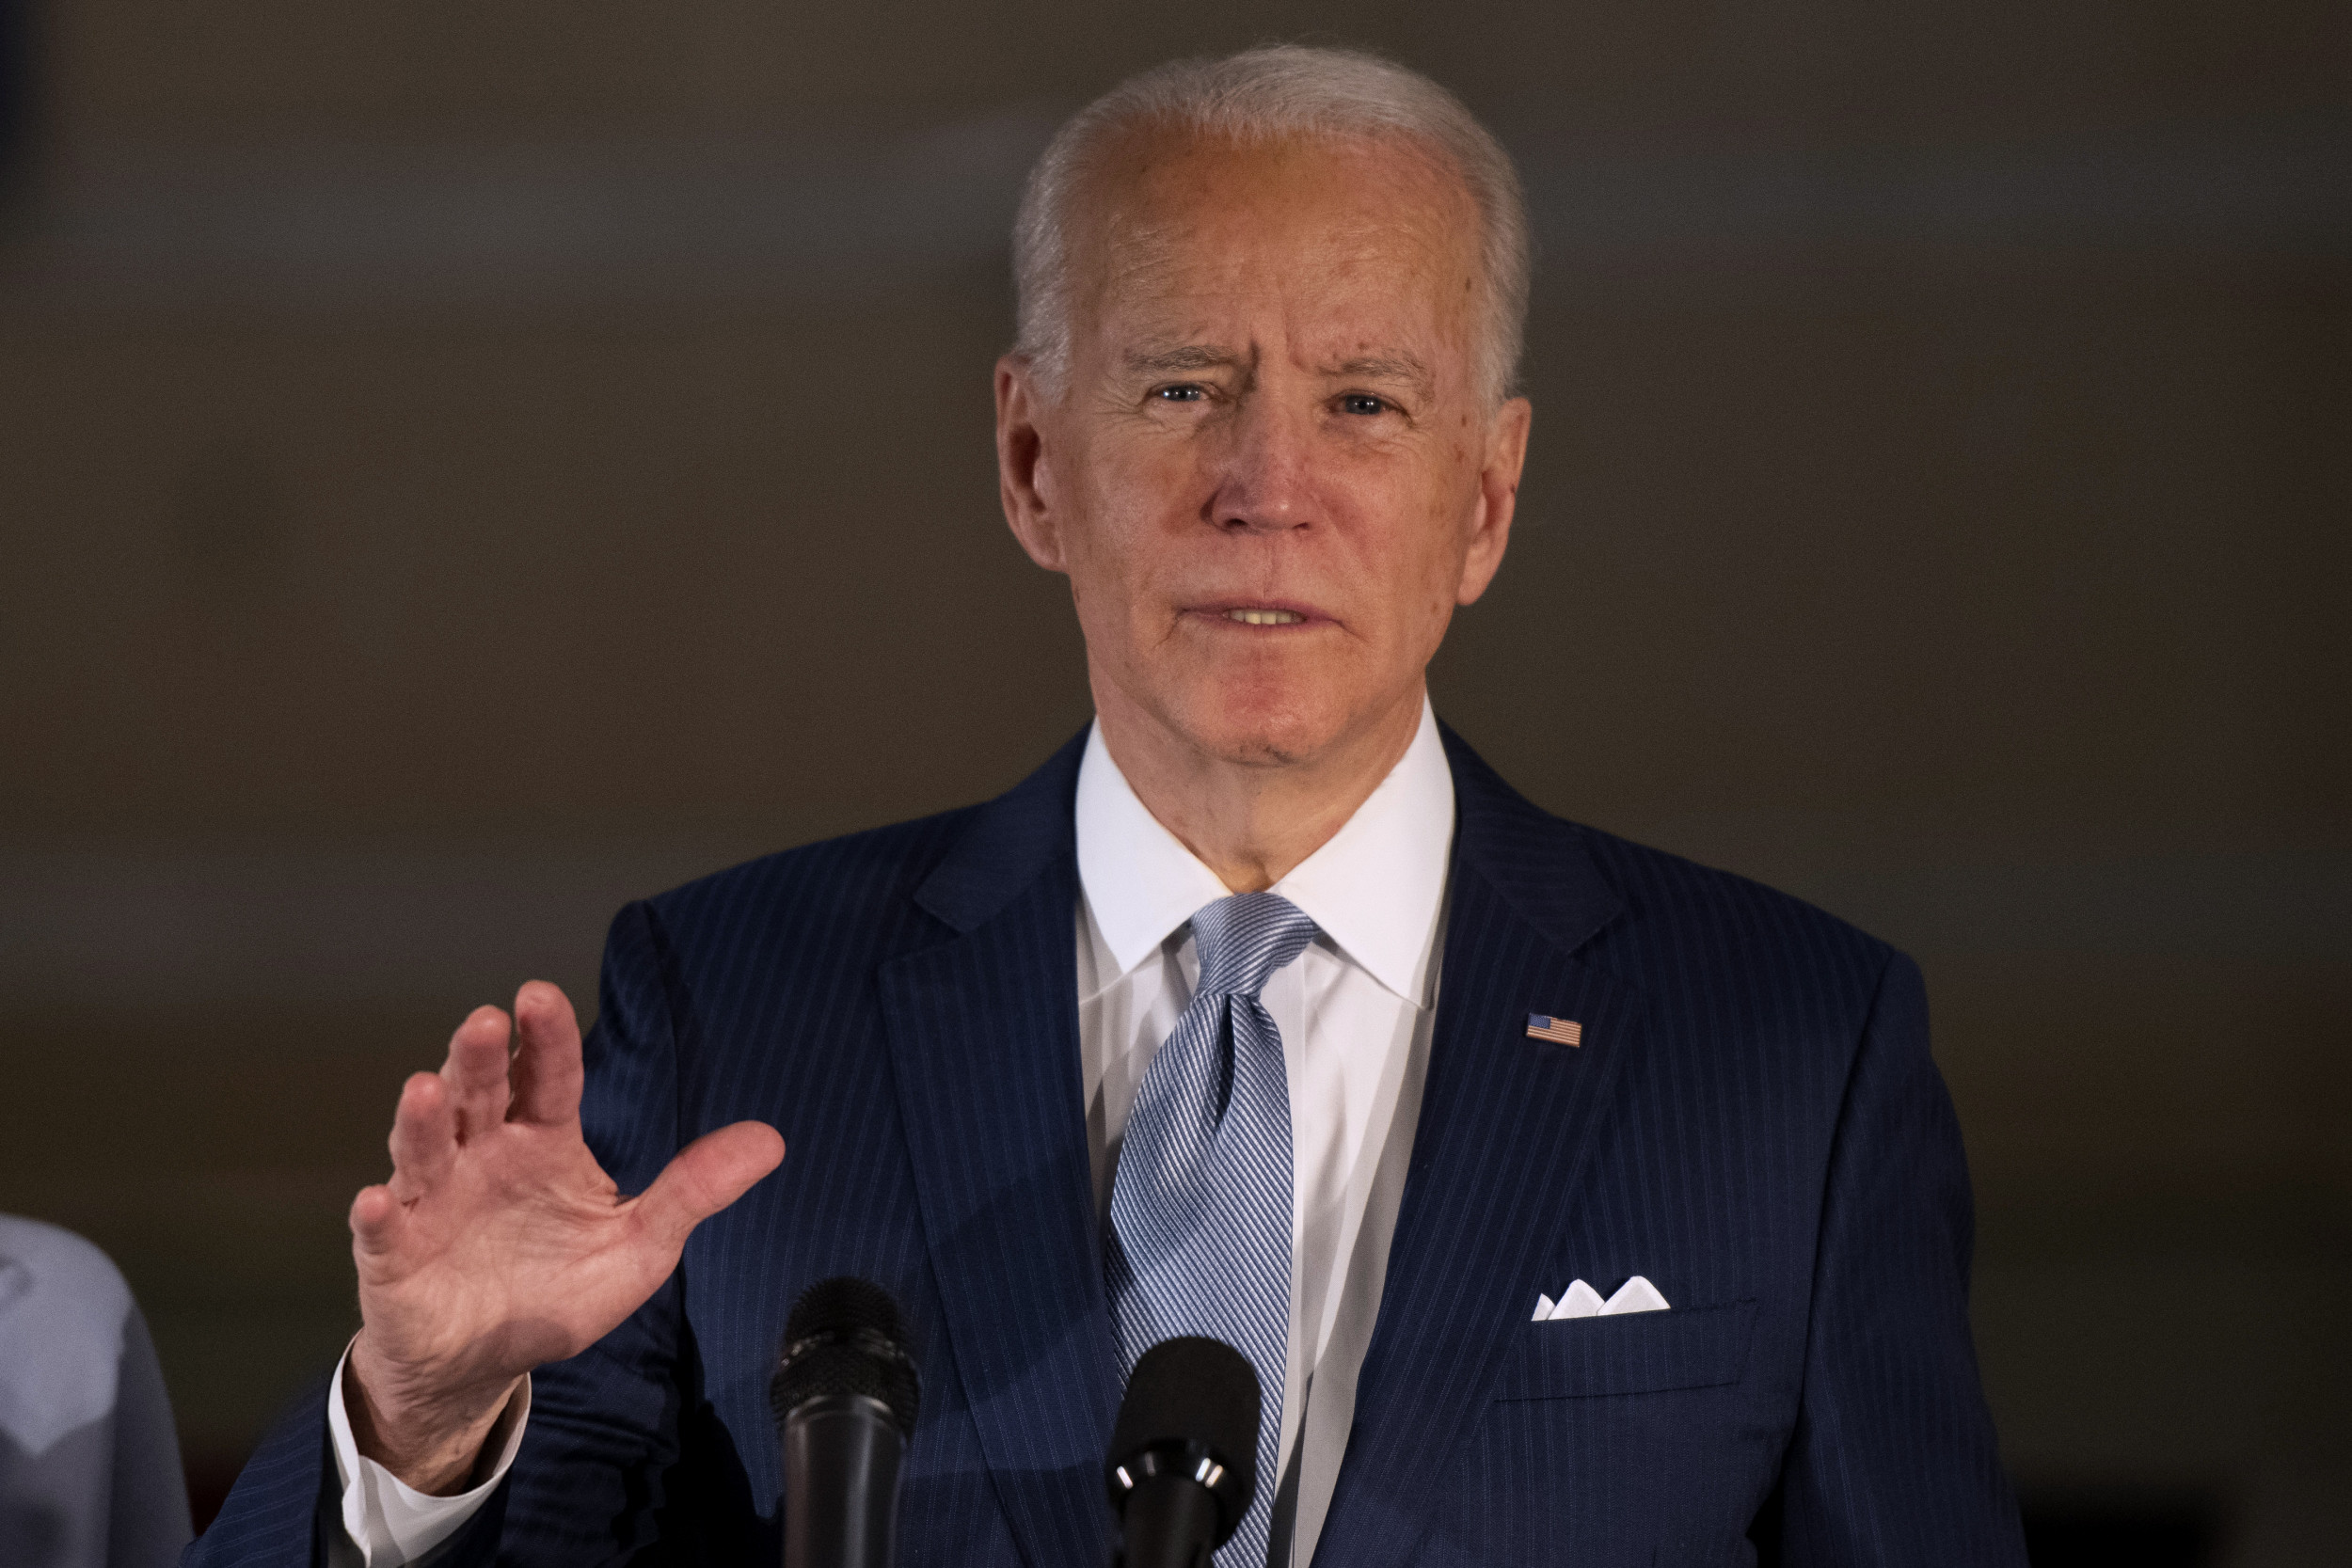 Biden Ready to Become Two-Term US President, Report Says